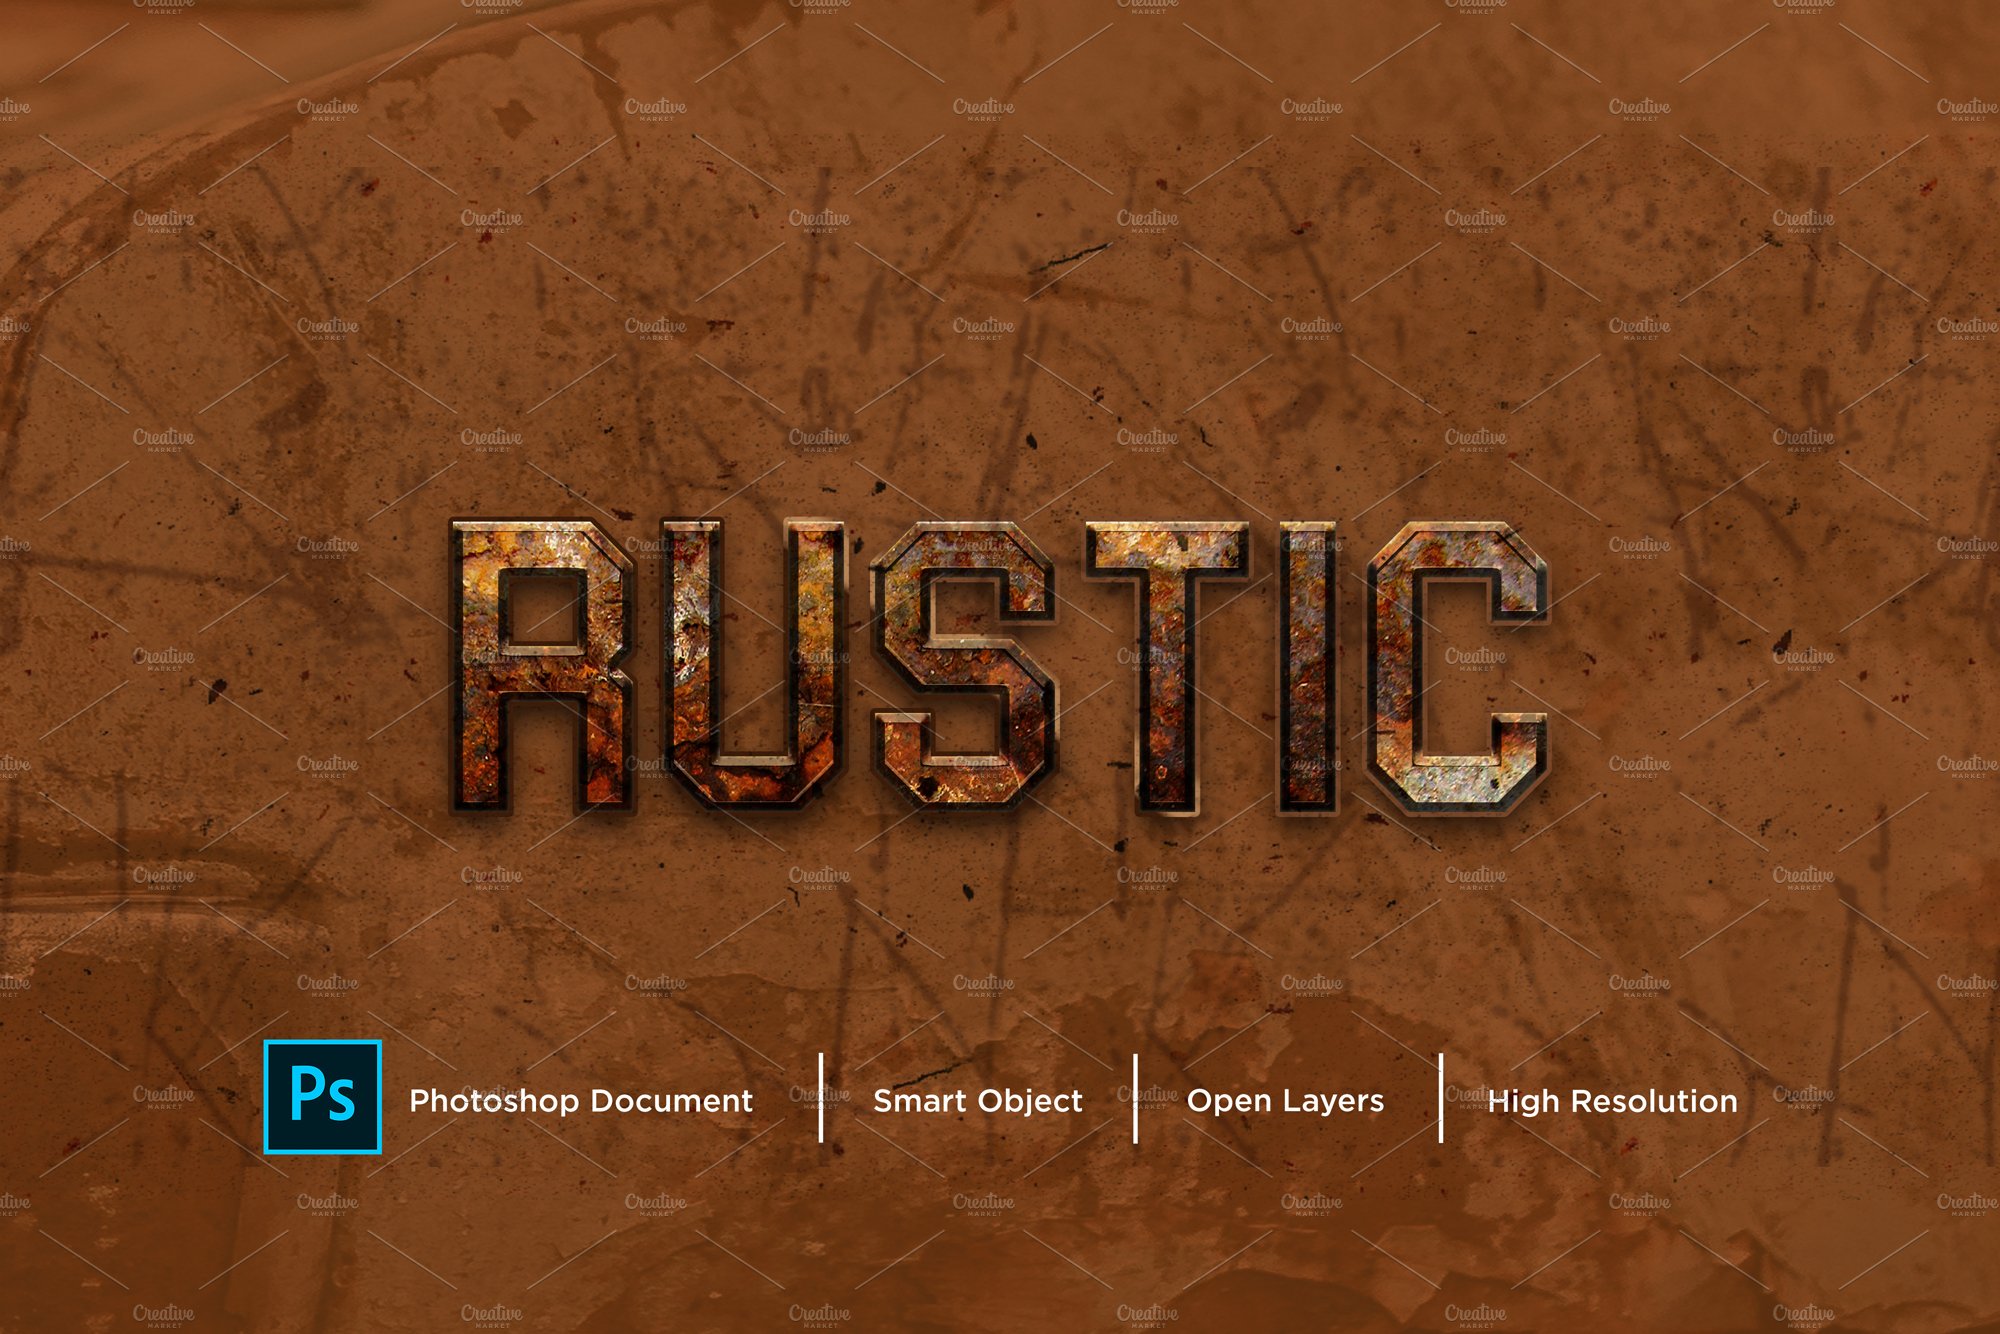 Rustic Text Effect & Layer Stylecover image.